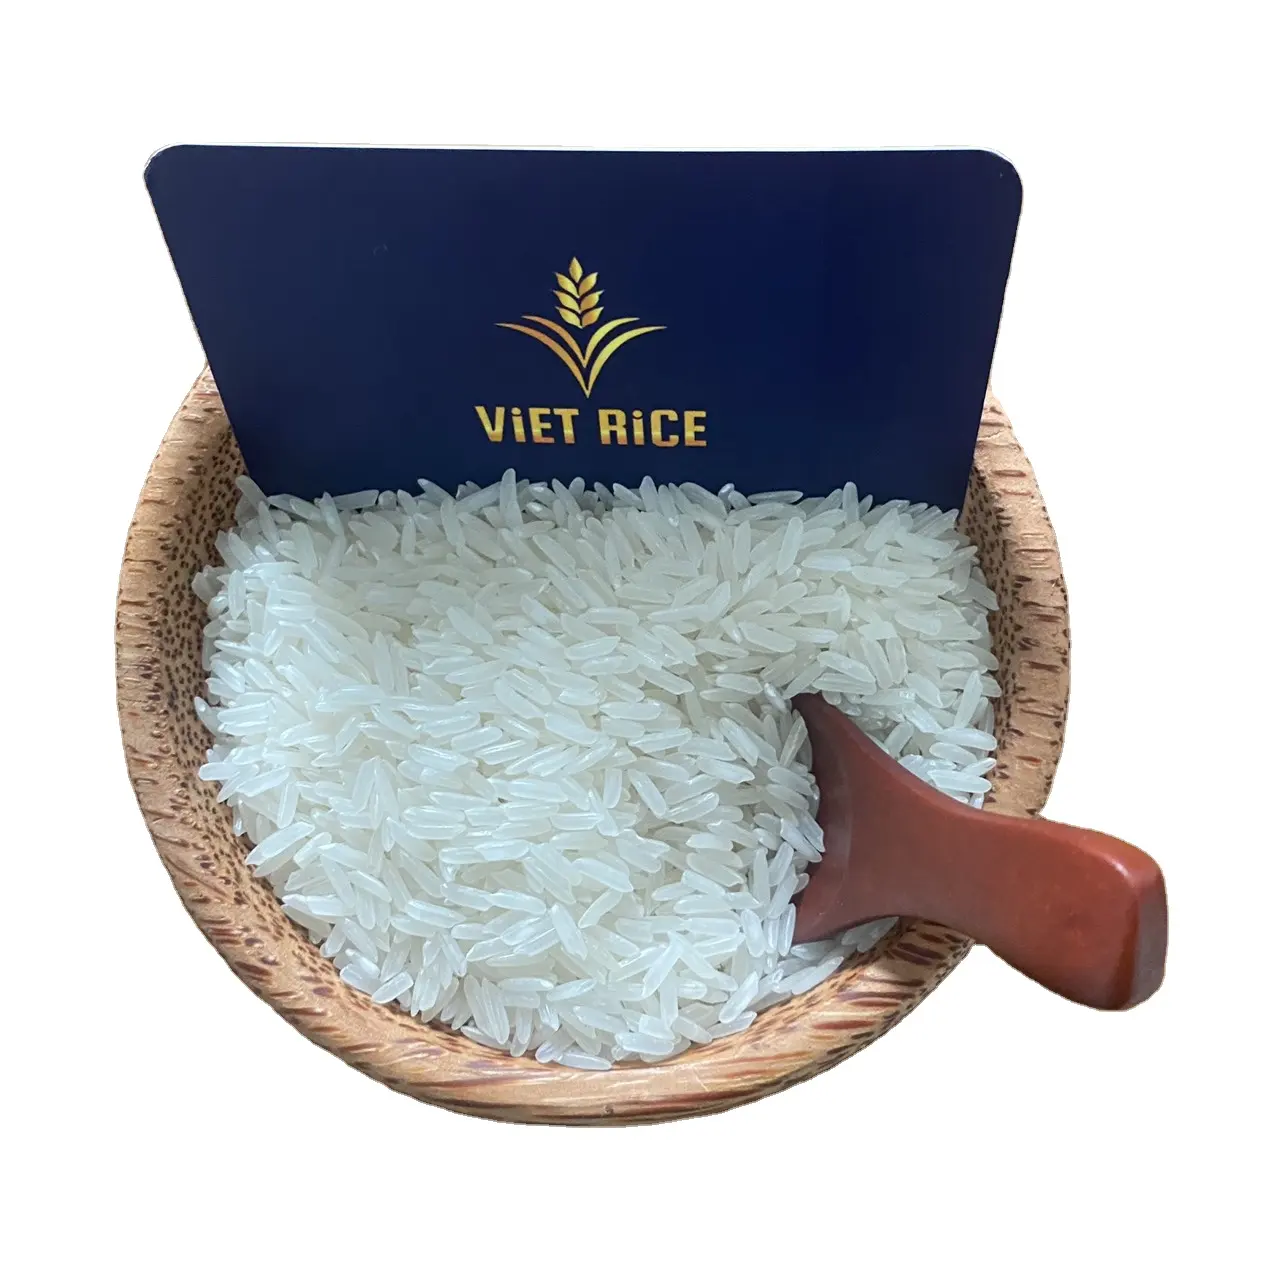 Most internationally exported rice - KDM long grain white rice - meets global export standards, high quality, competitive price